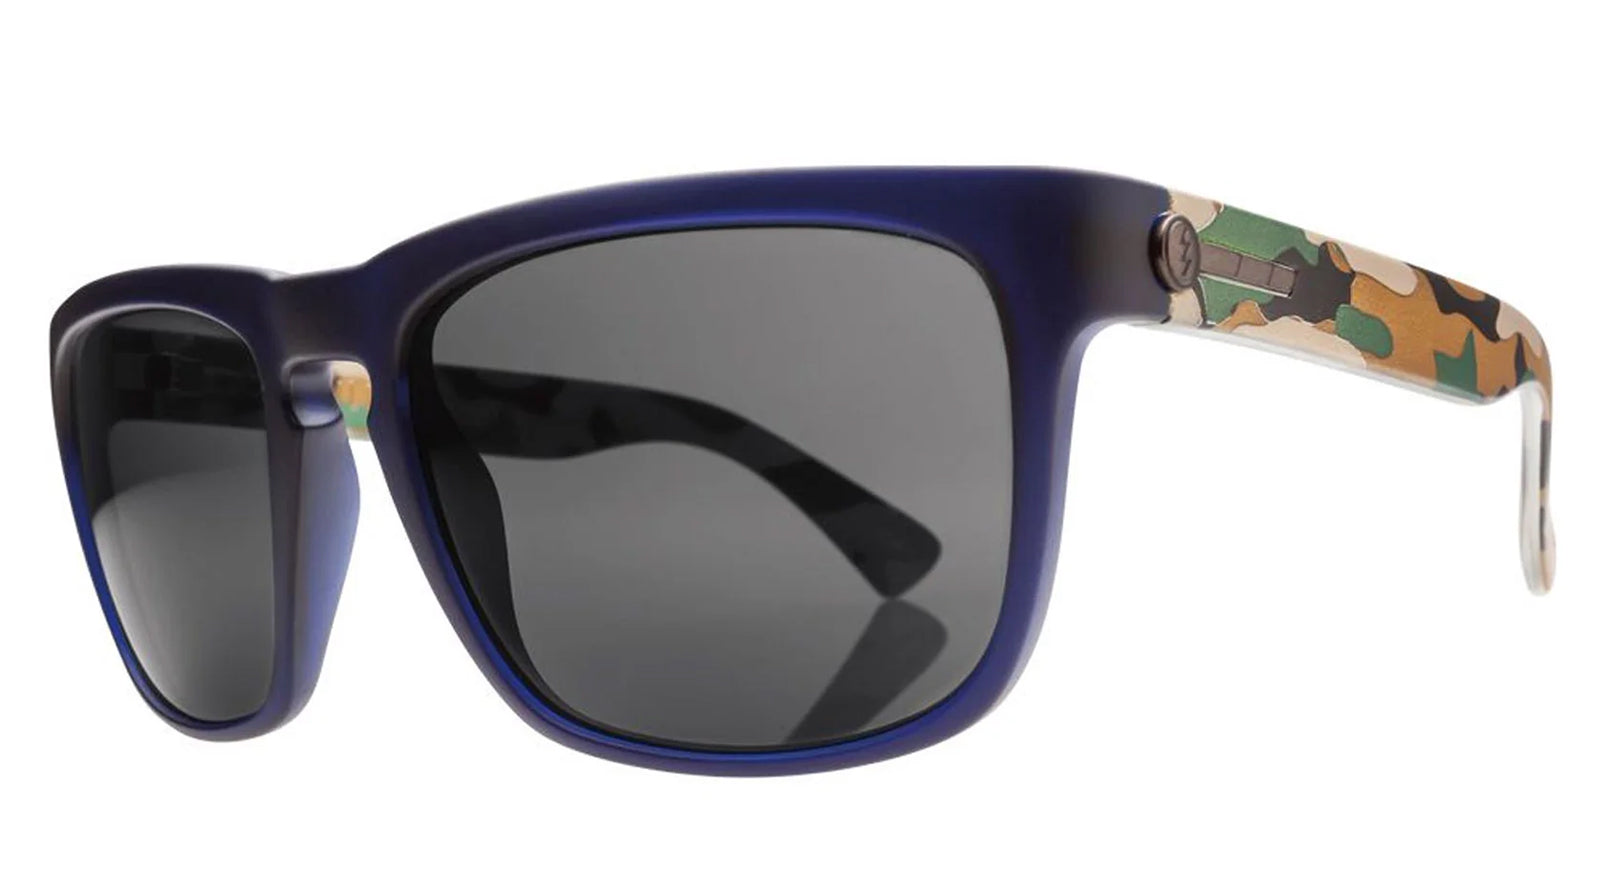 Electric Knoxville Men's Lifestyle Sunglasses